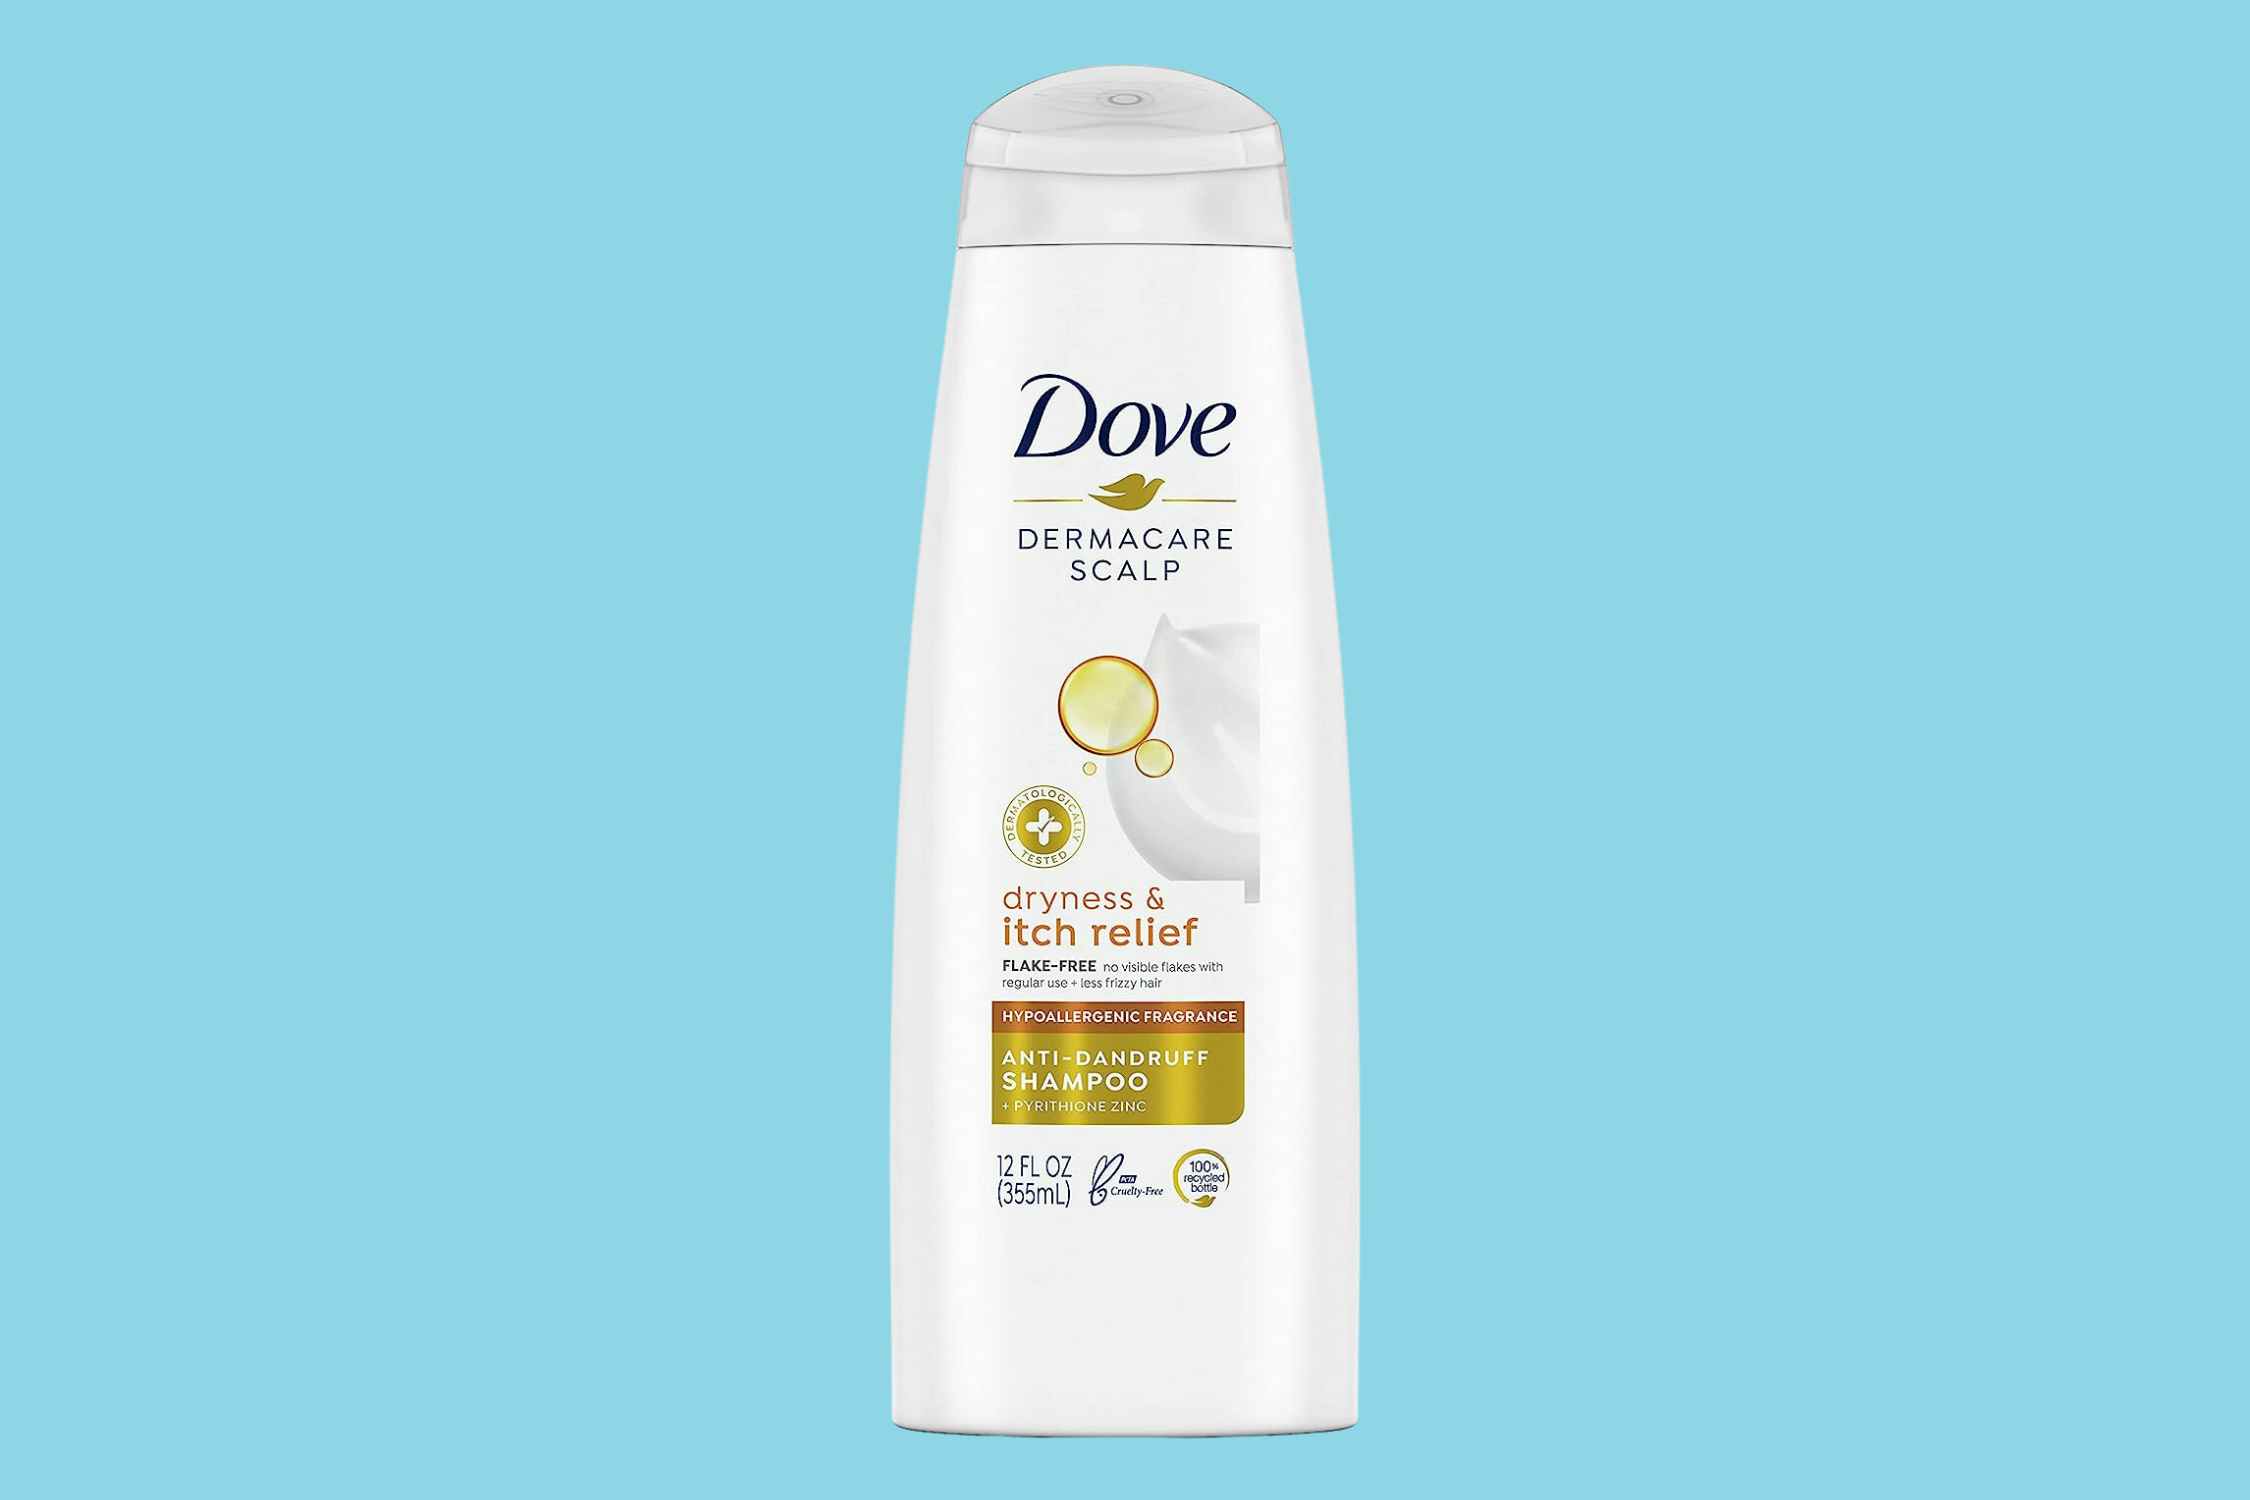 Dove DermaCare Scalp Shampoo, as Little as $2.50 on Amazon